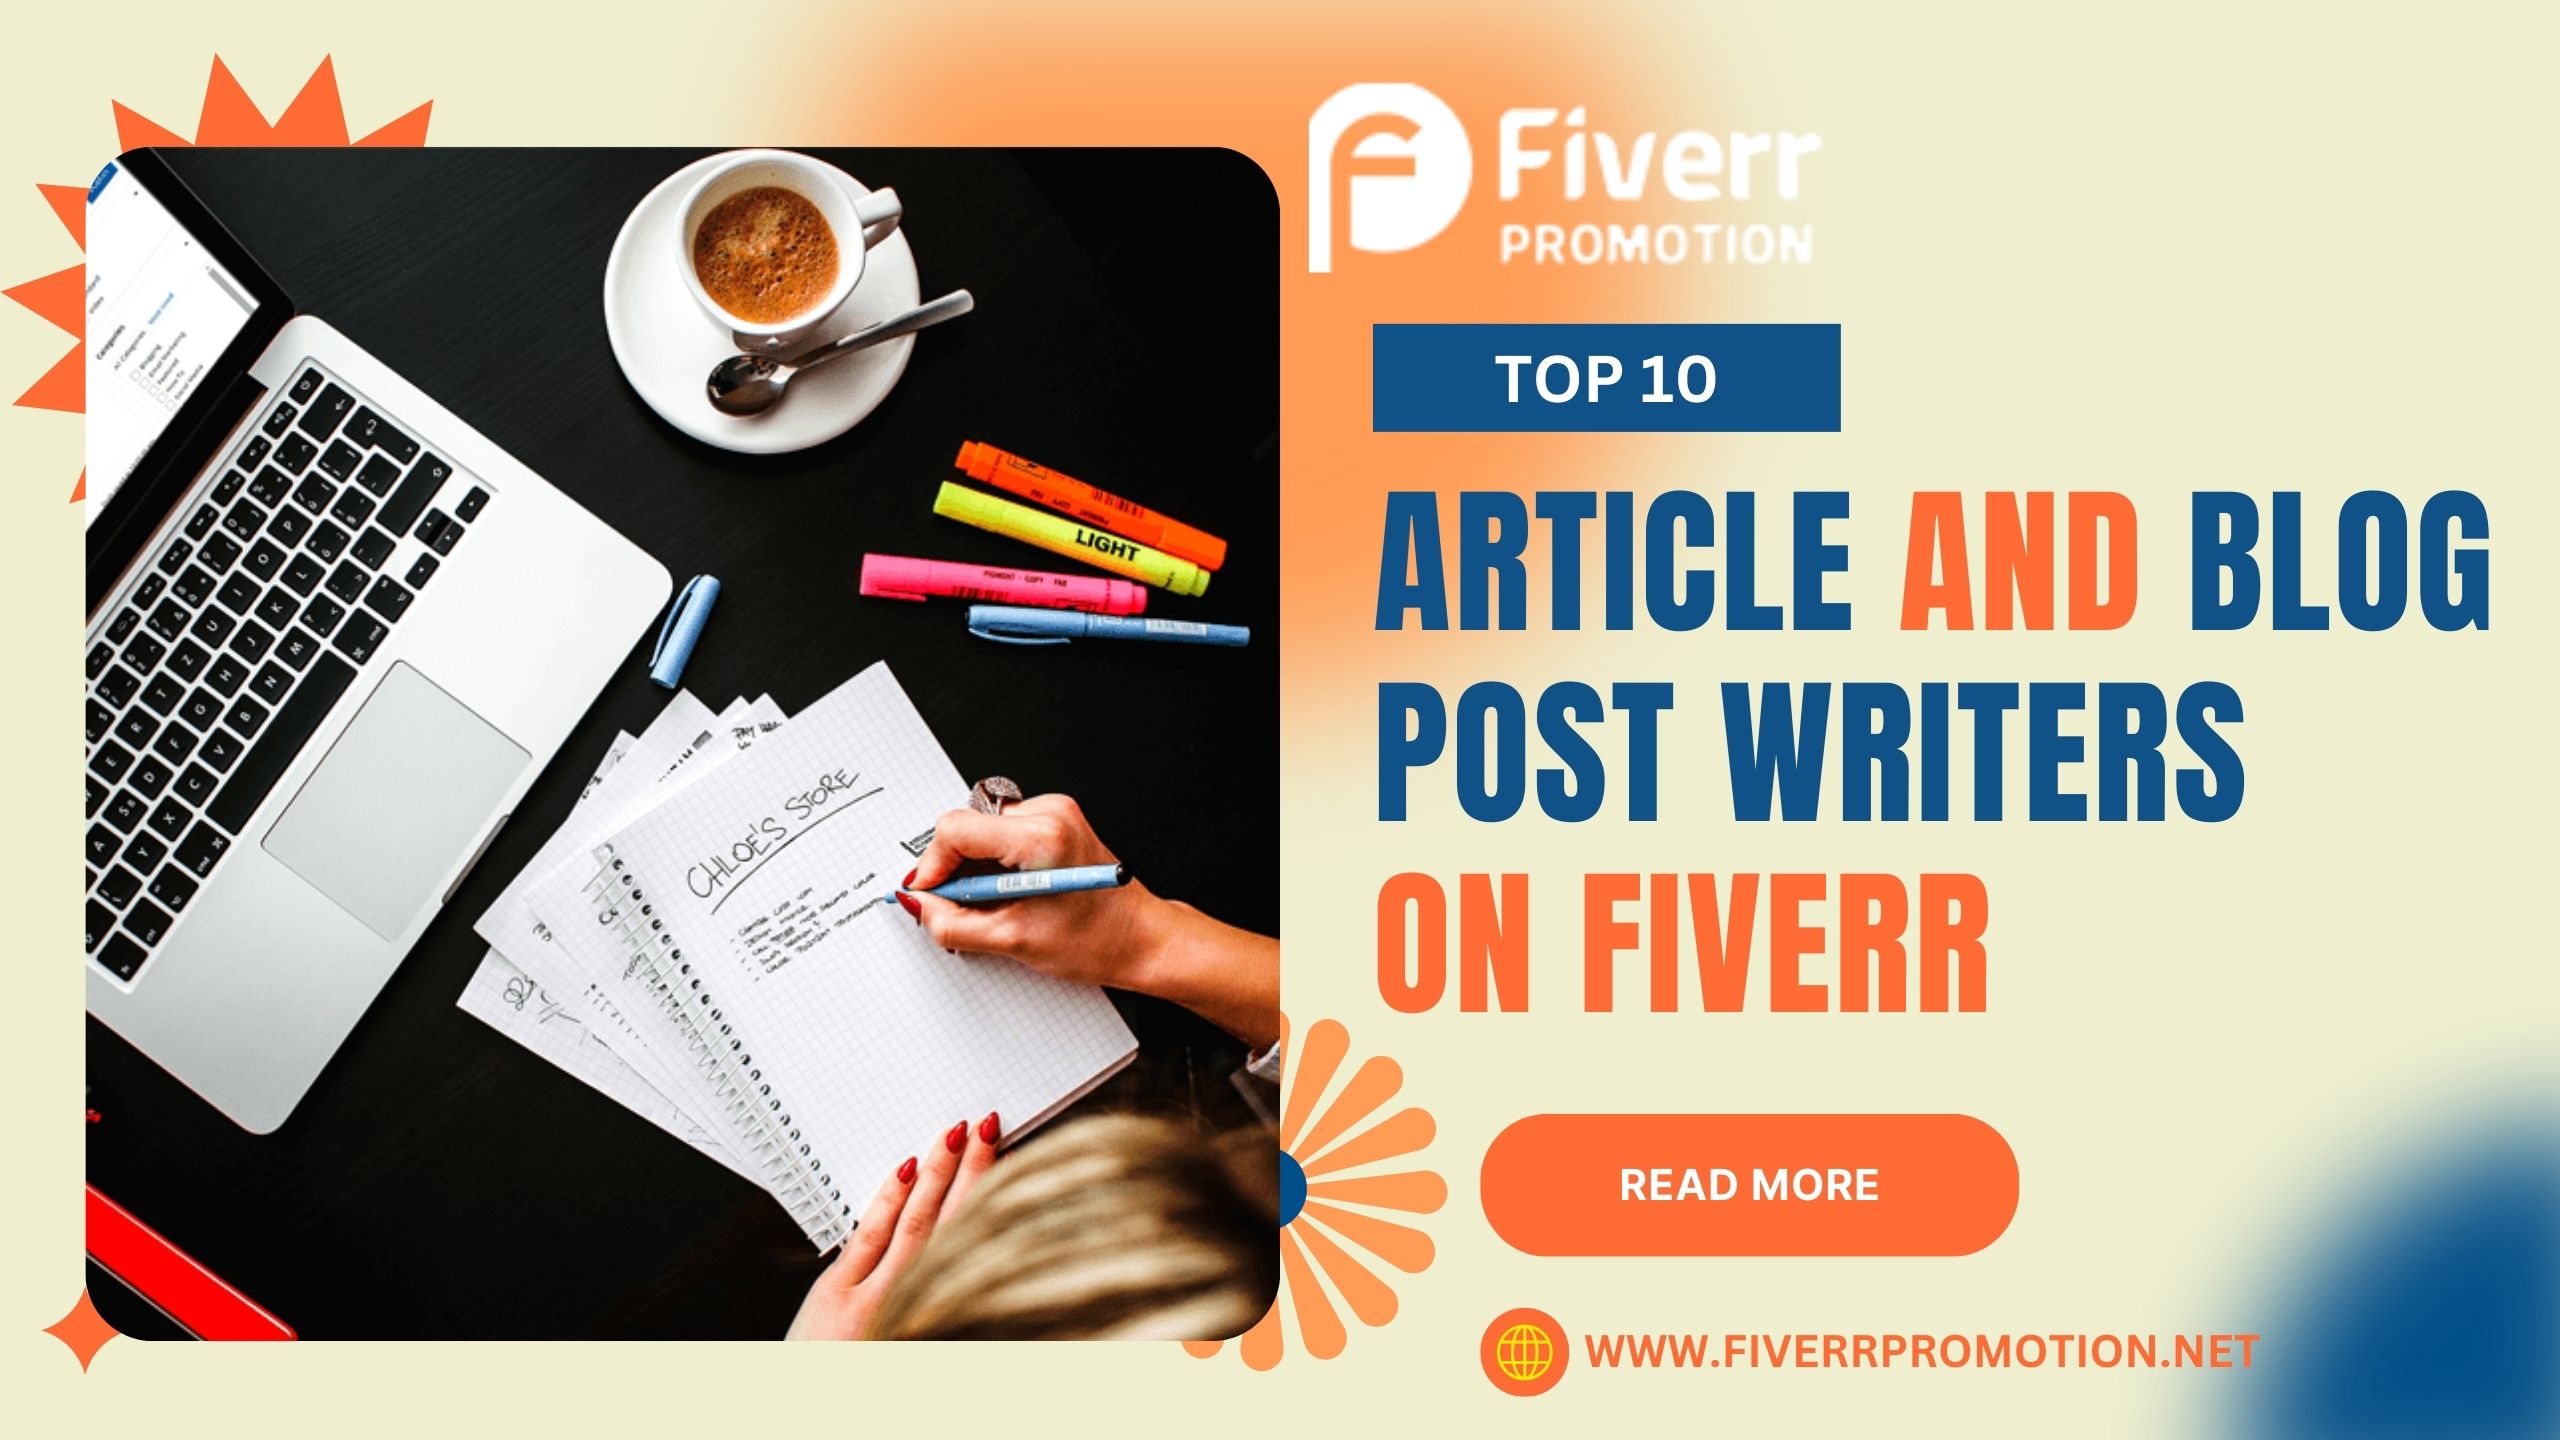 Top 10 Article and Blog Post Writers on Fiverr